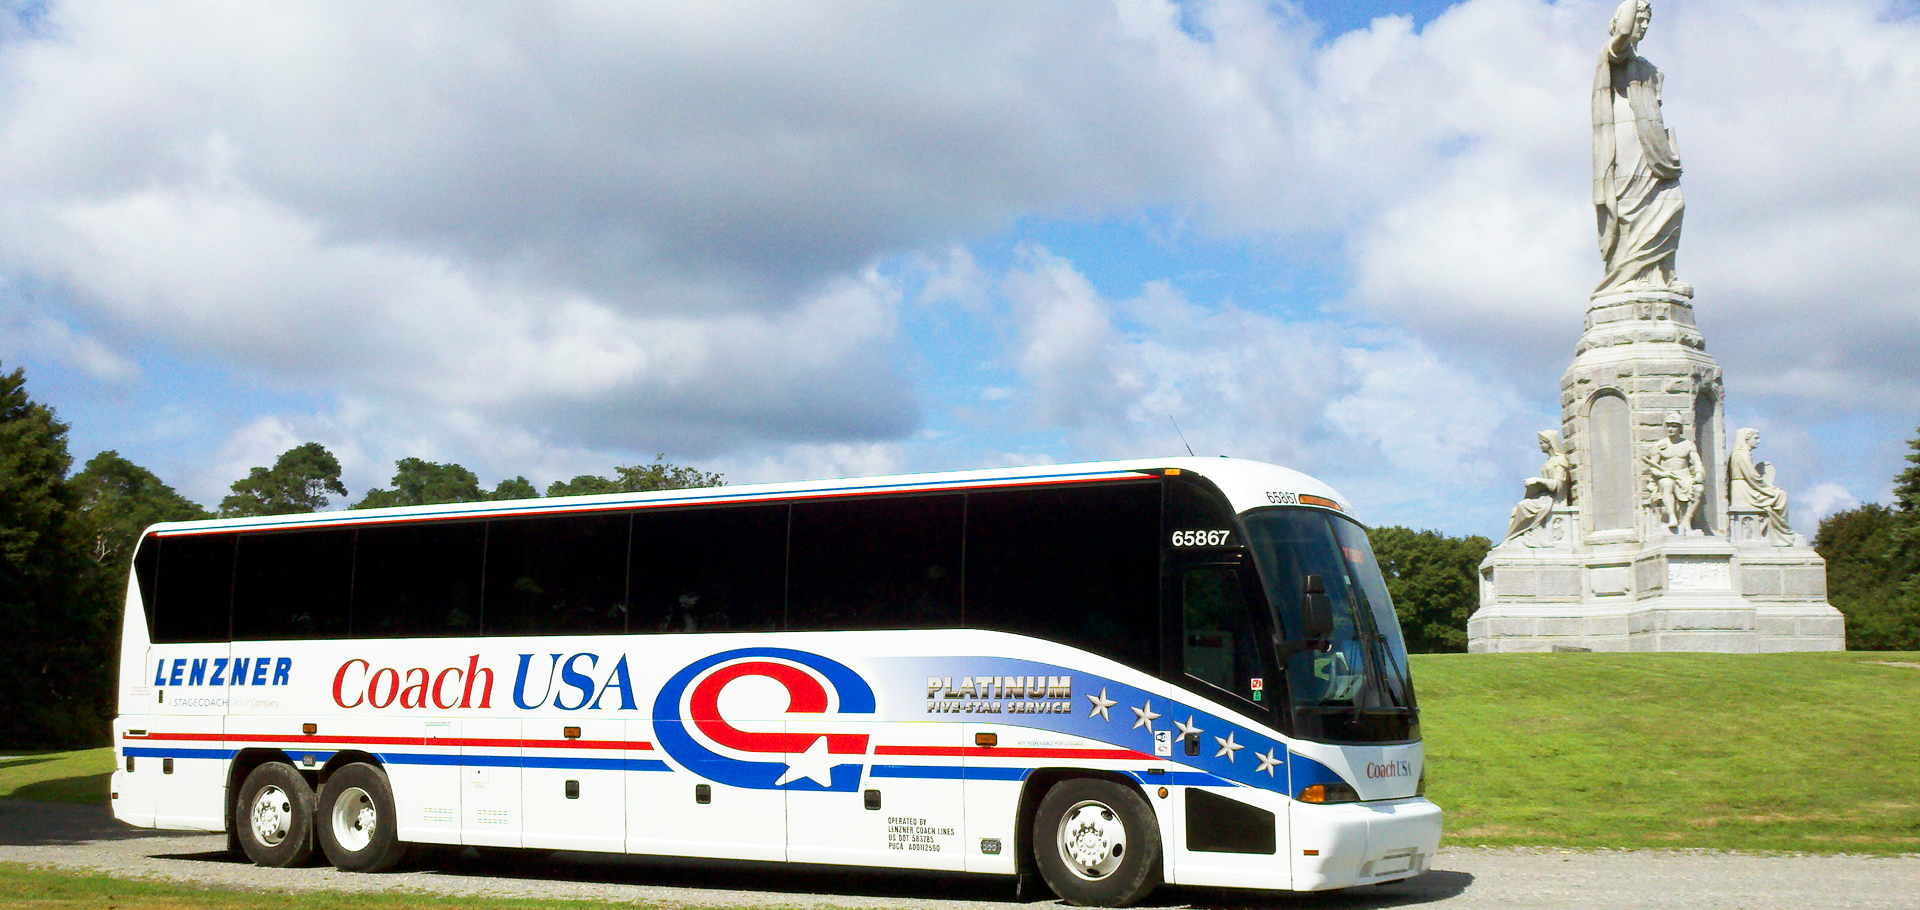 Coach USA charter buses for school field trips